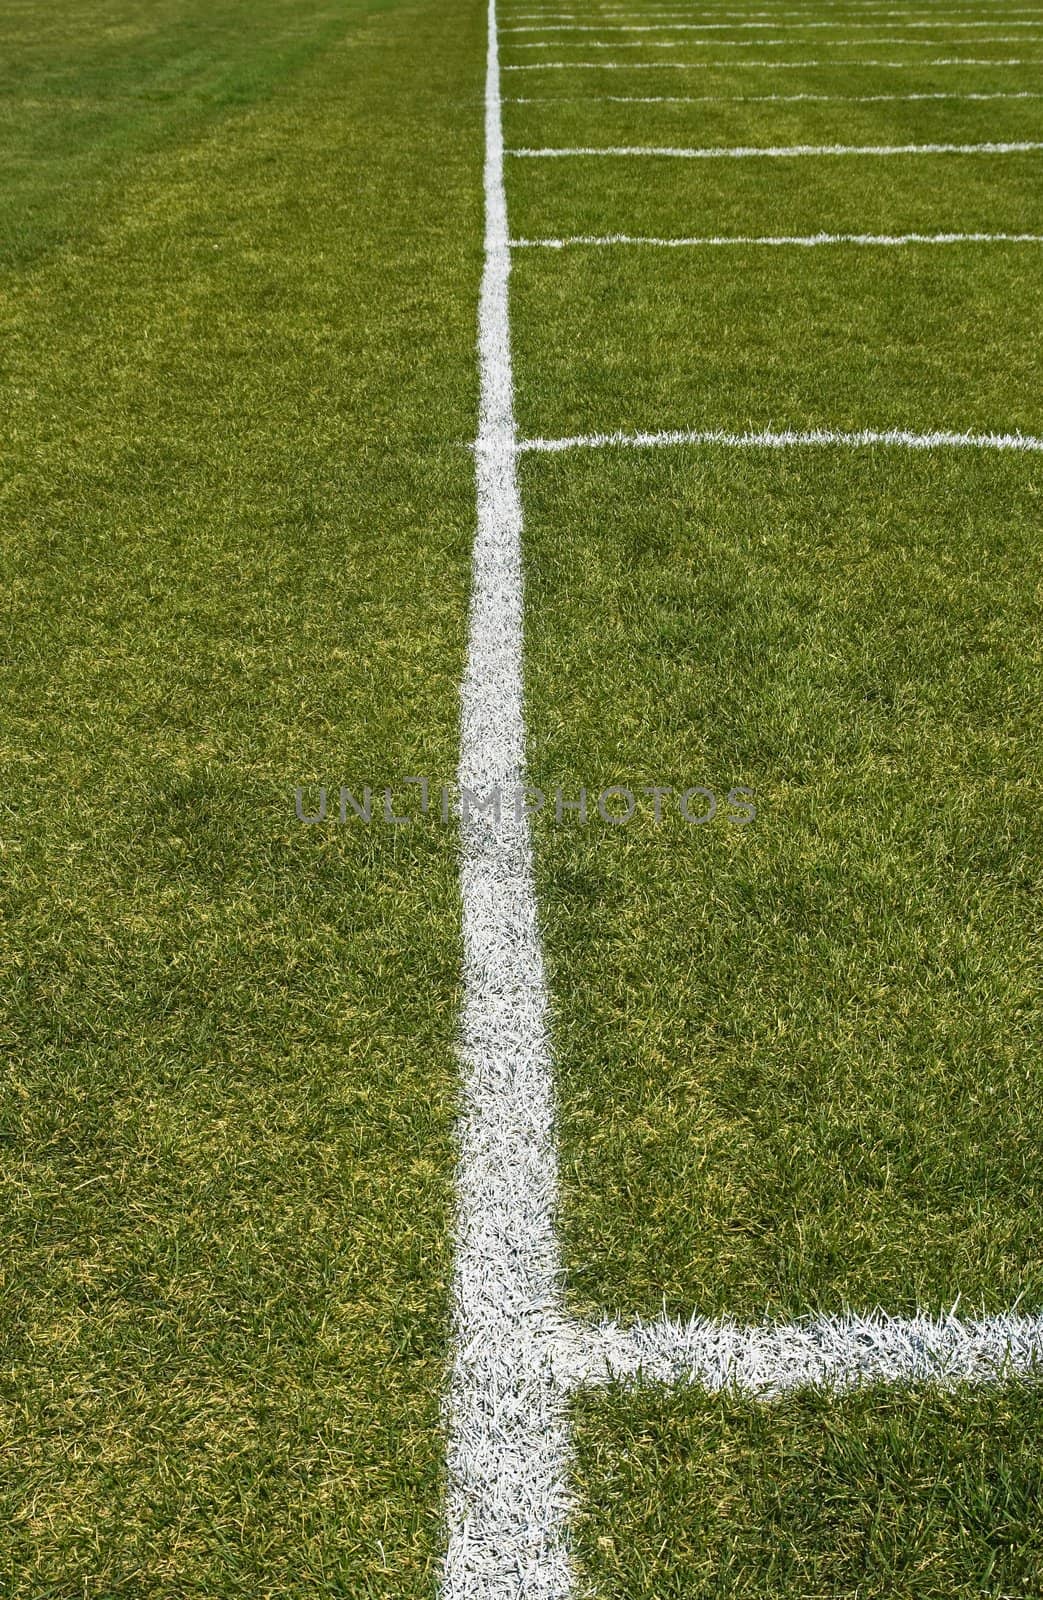 Side boundary line of a green football field.